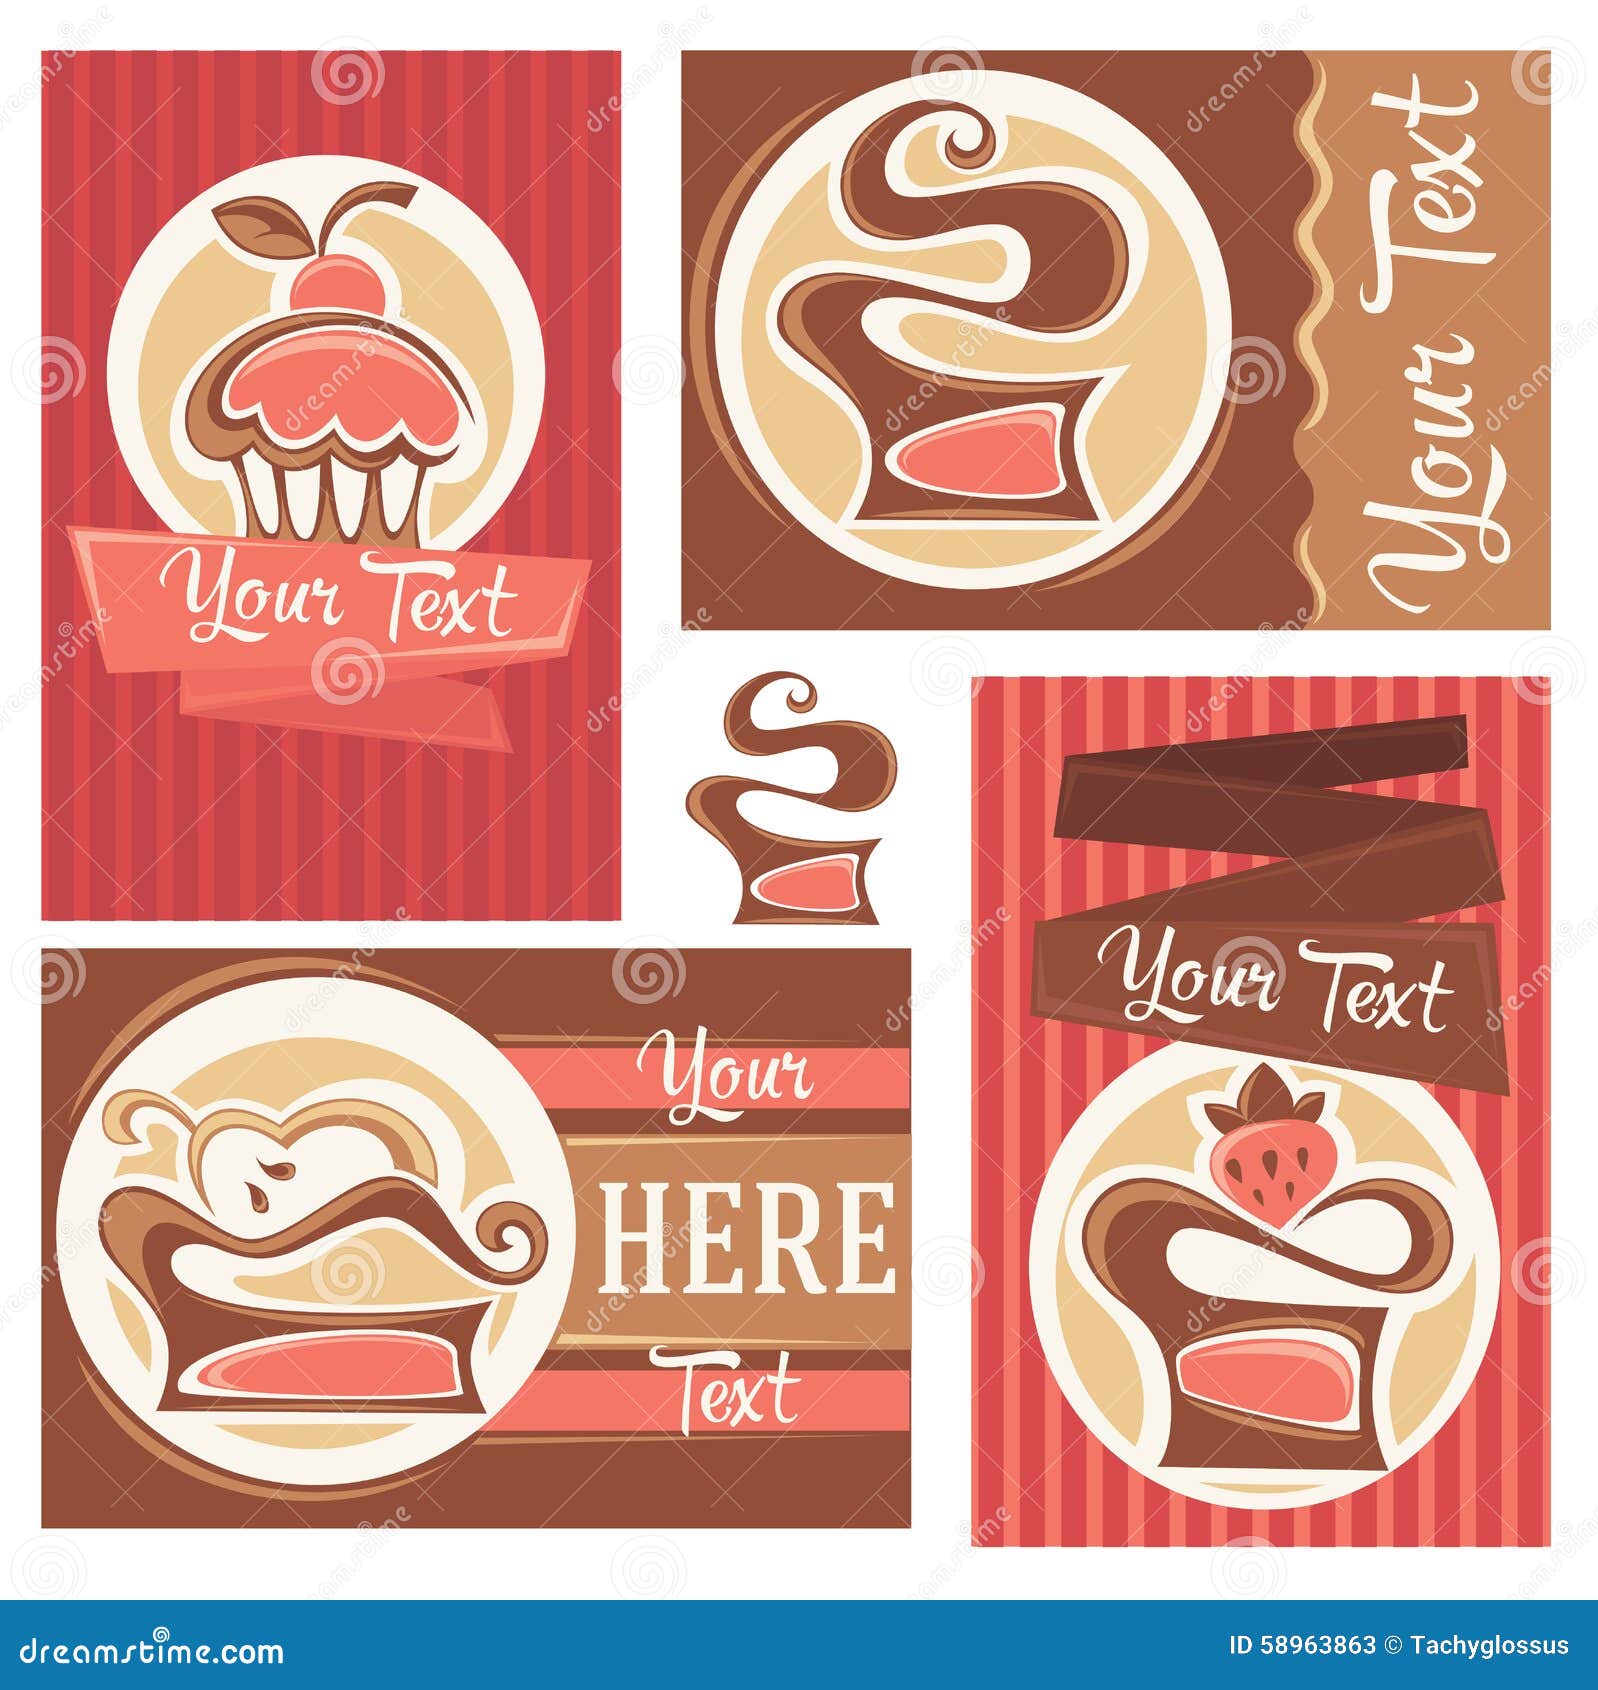 cakes business cards 3